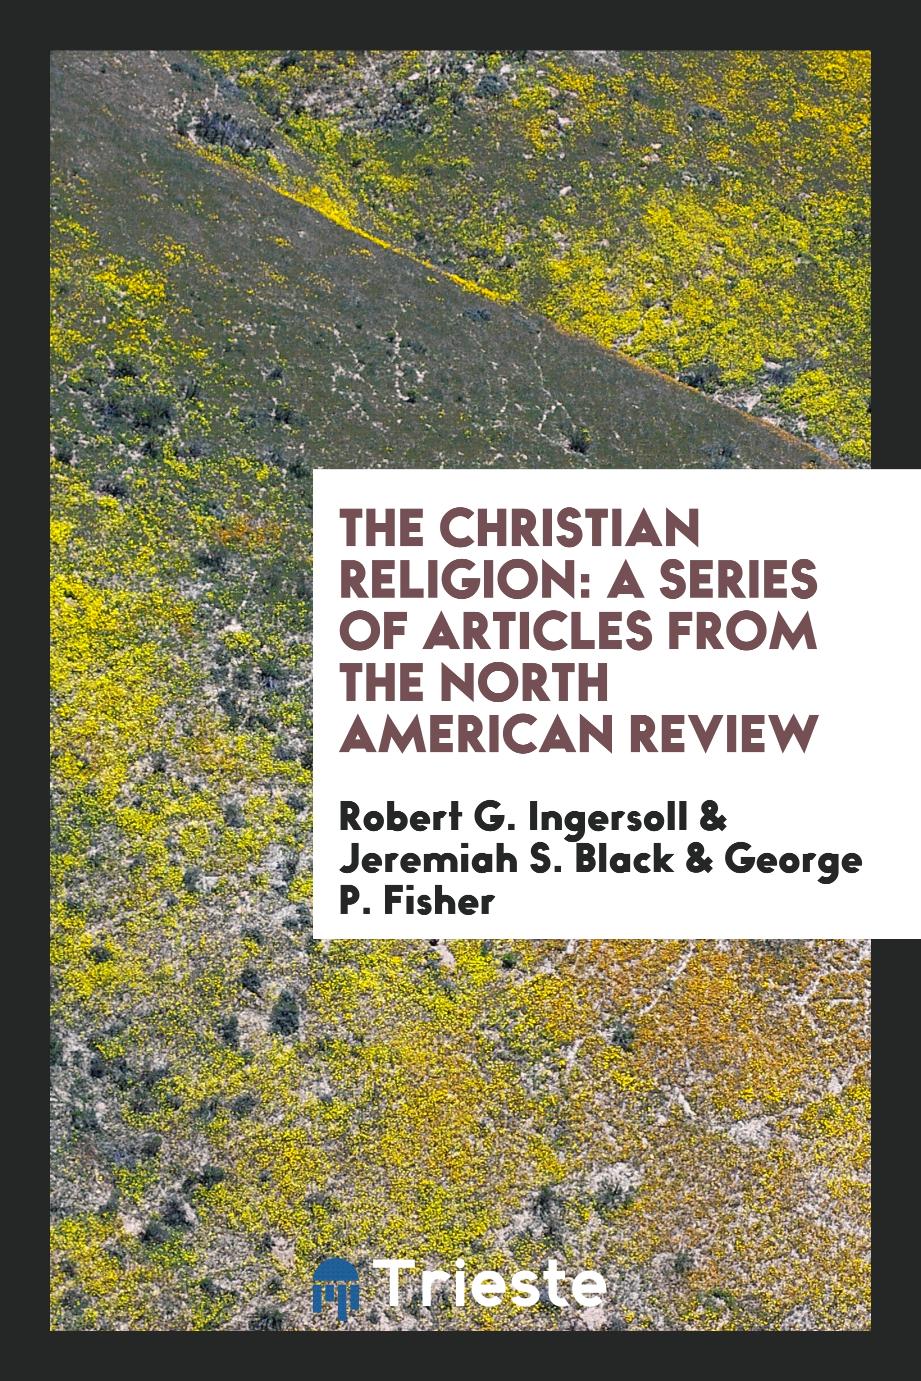 The Christian Religion: A Series of Articles from the North American Review